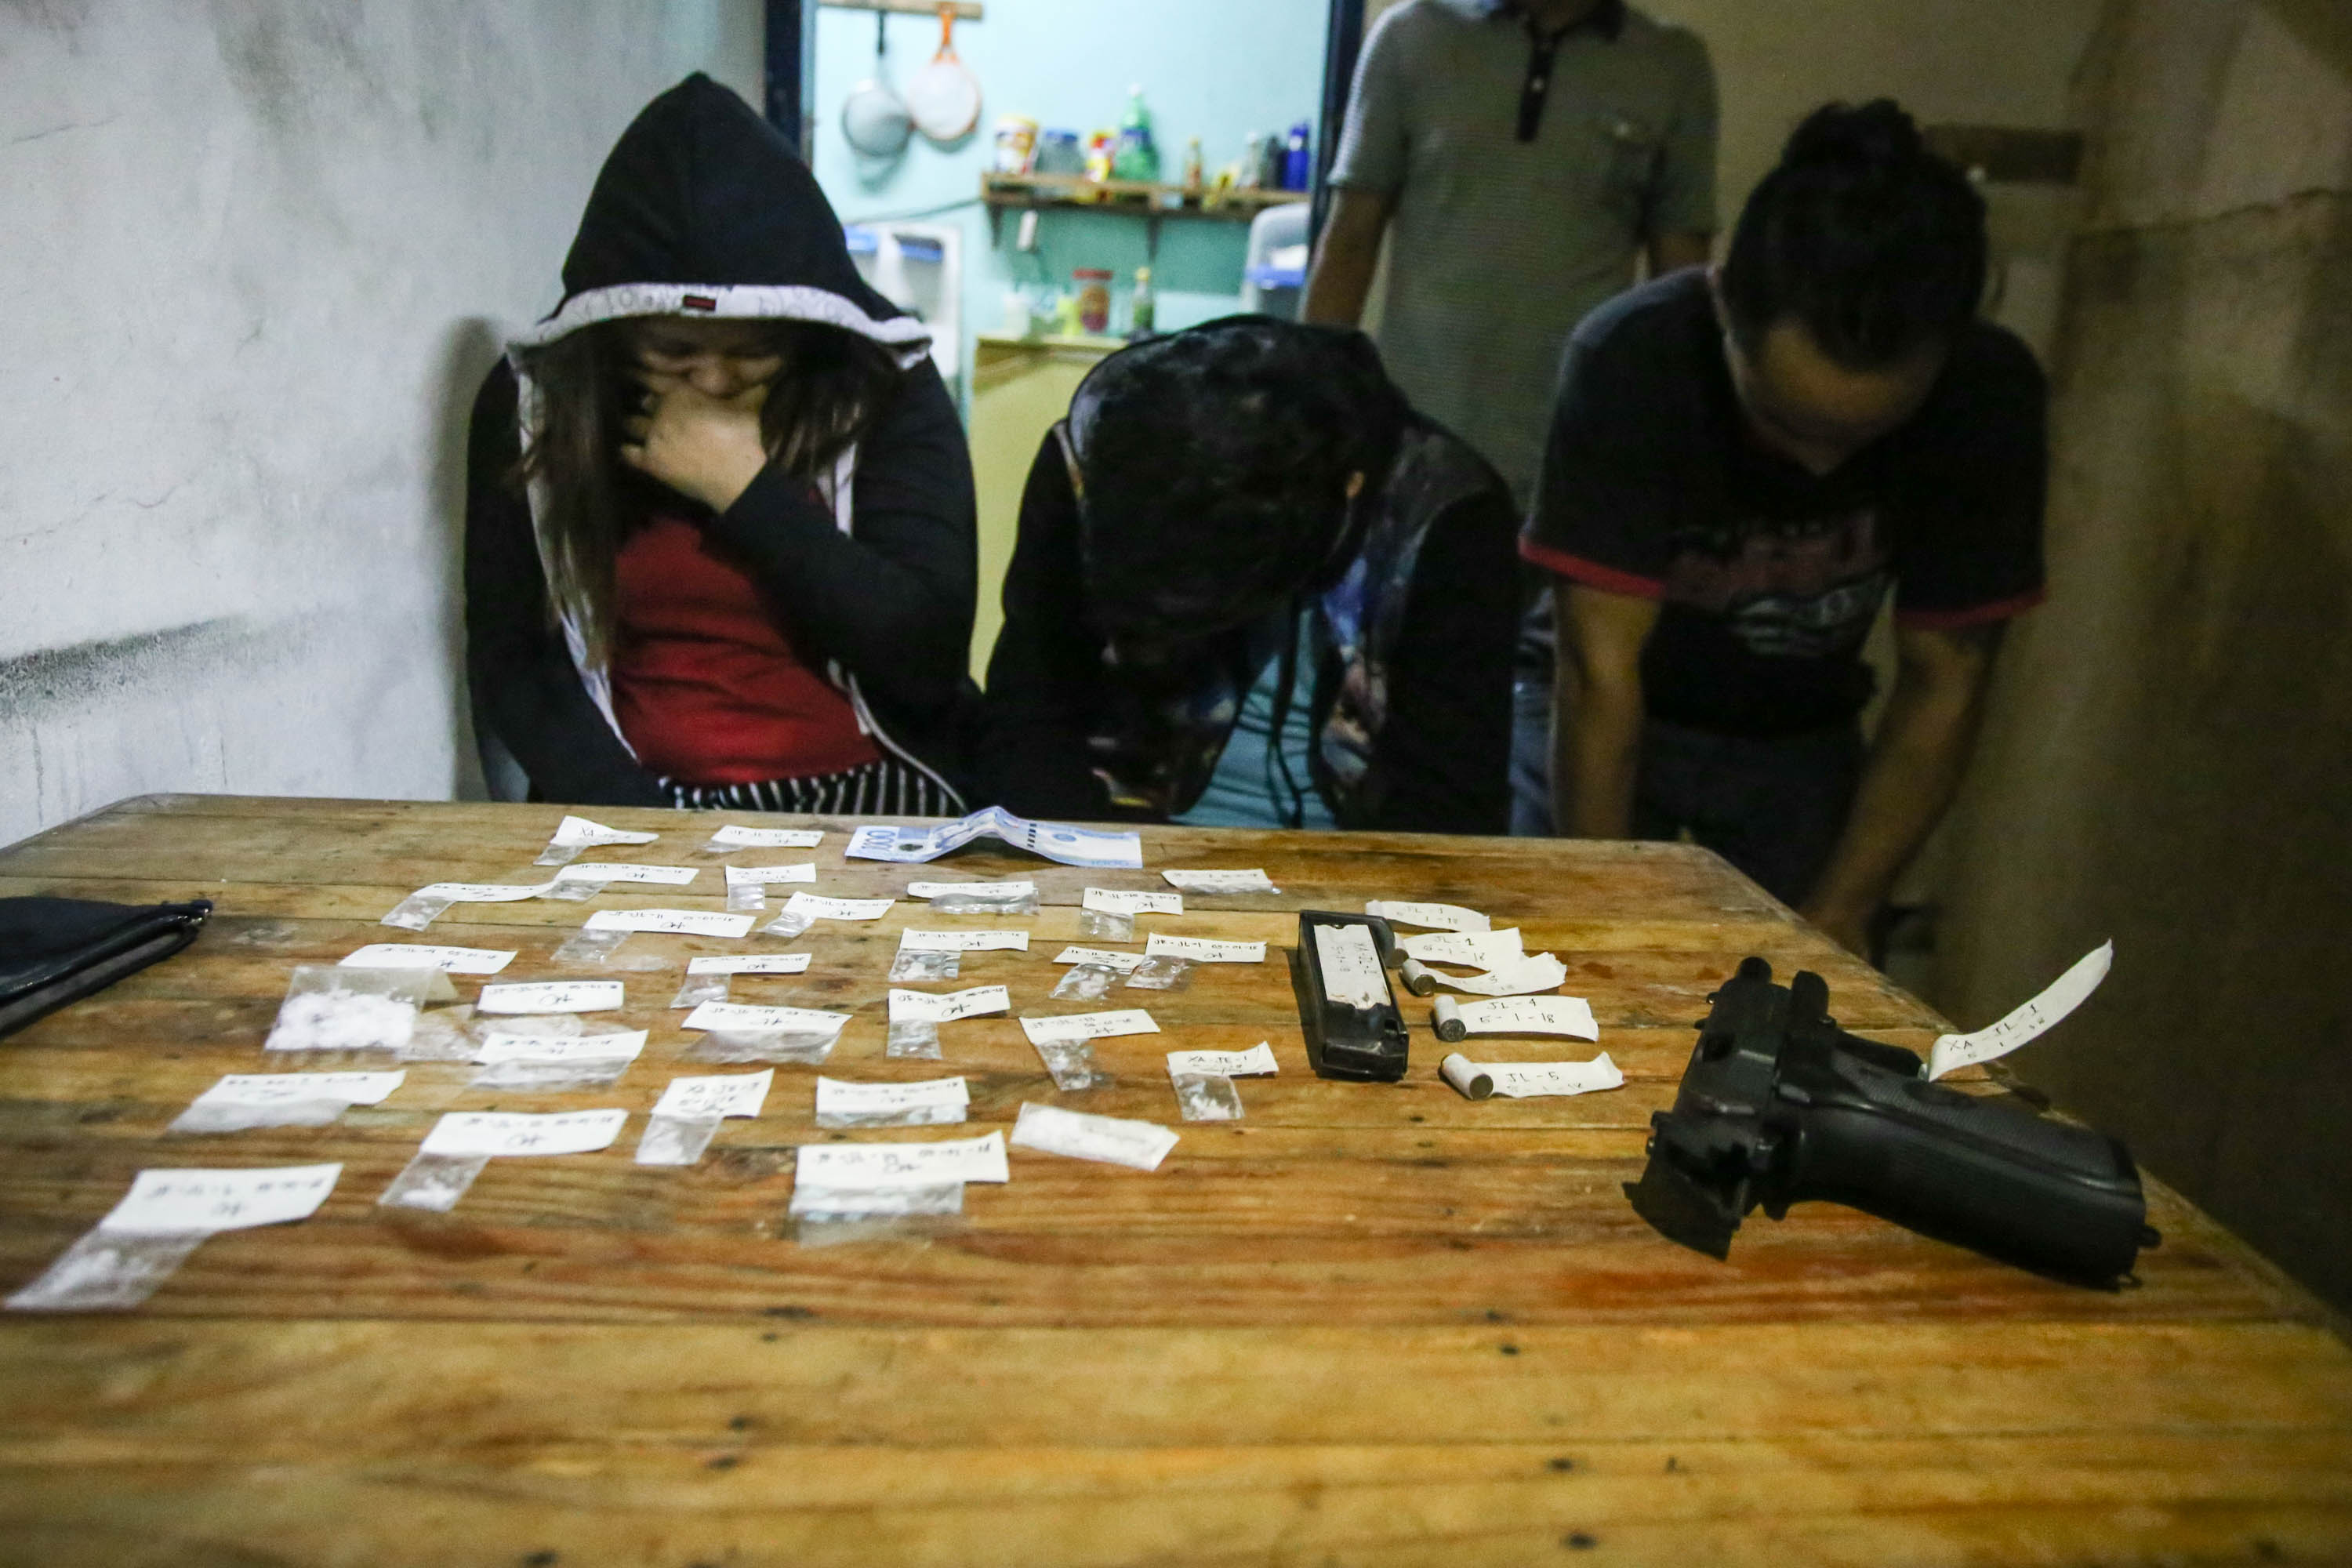 PNP: 11,000 villages cleared of drugs